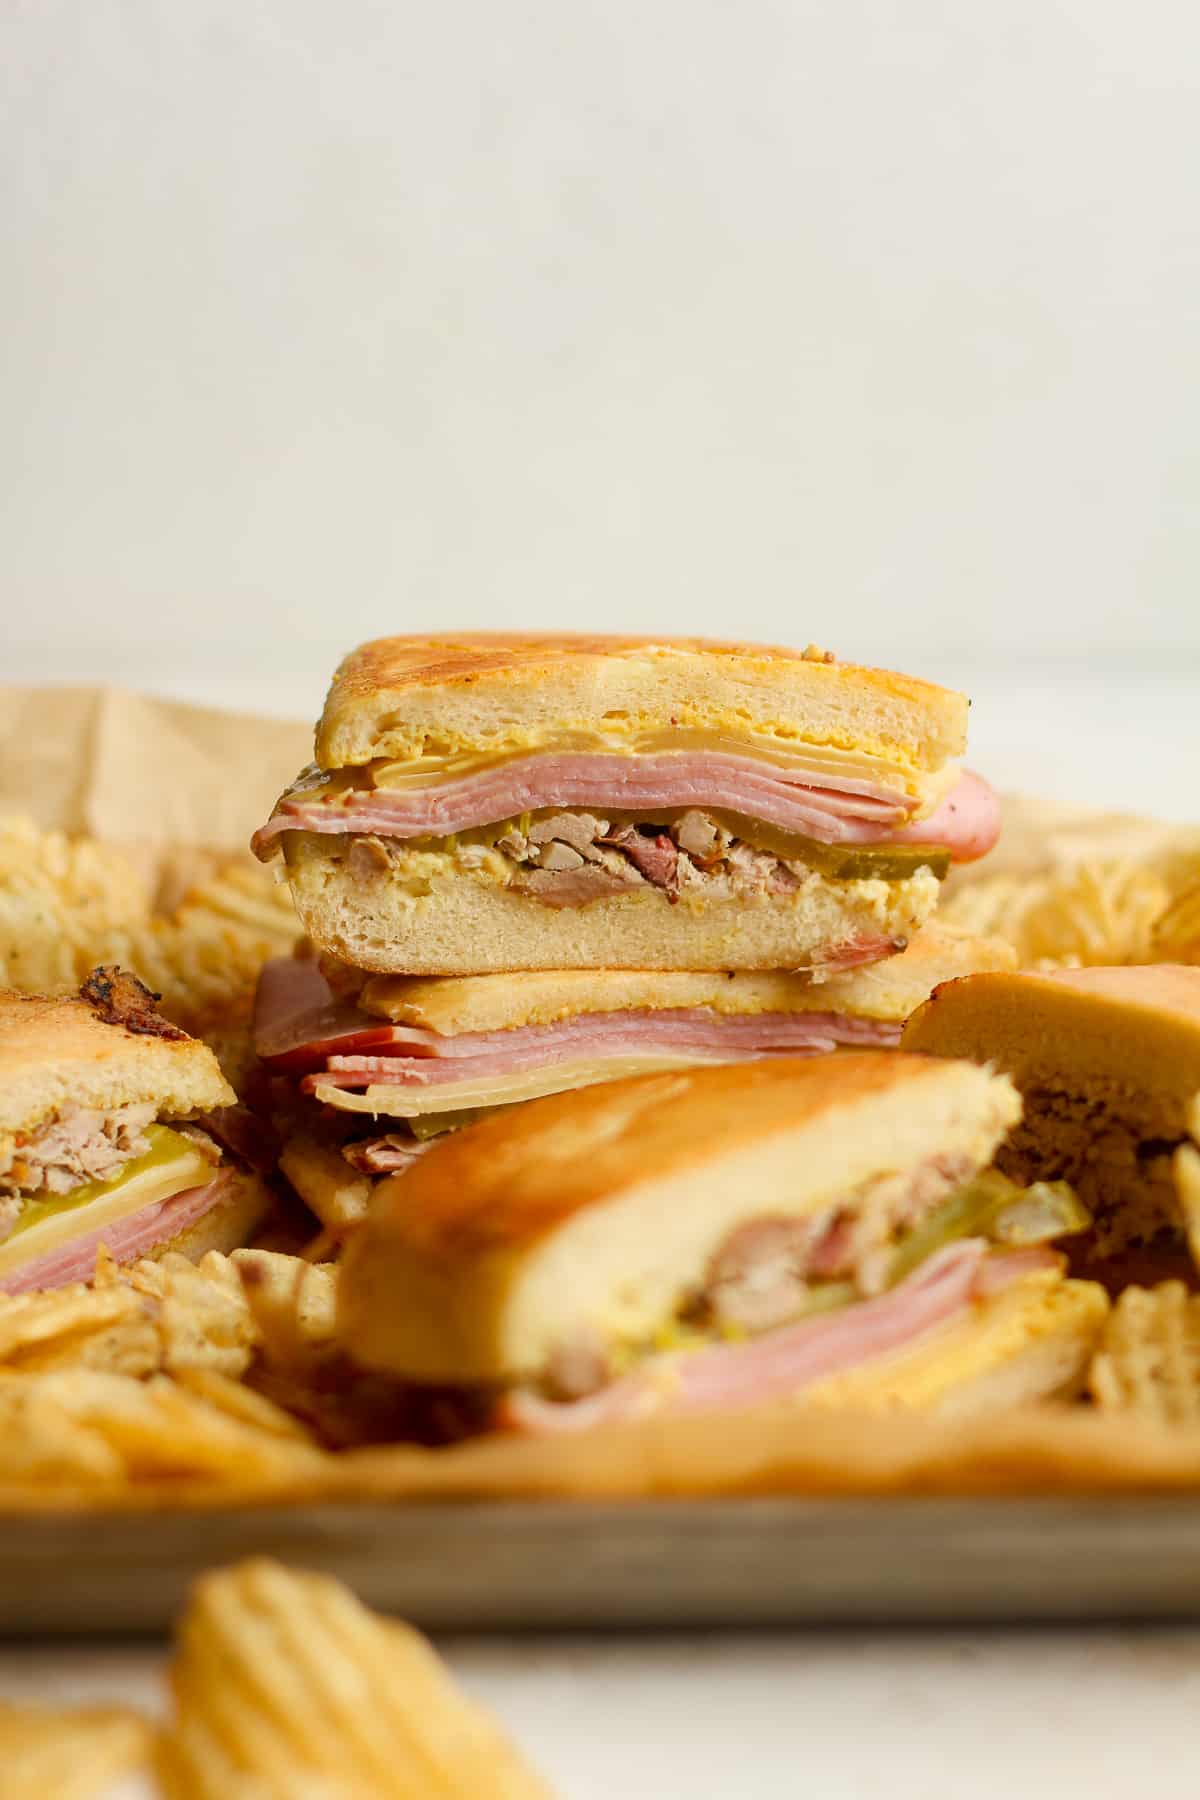 Some stacked Cuban sandwiches and chips.